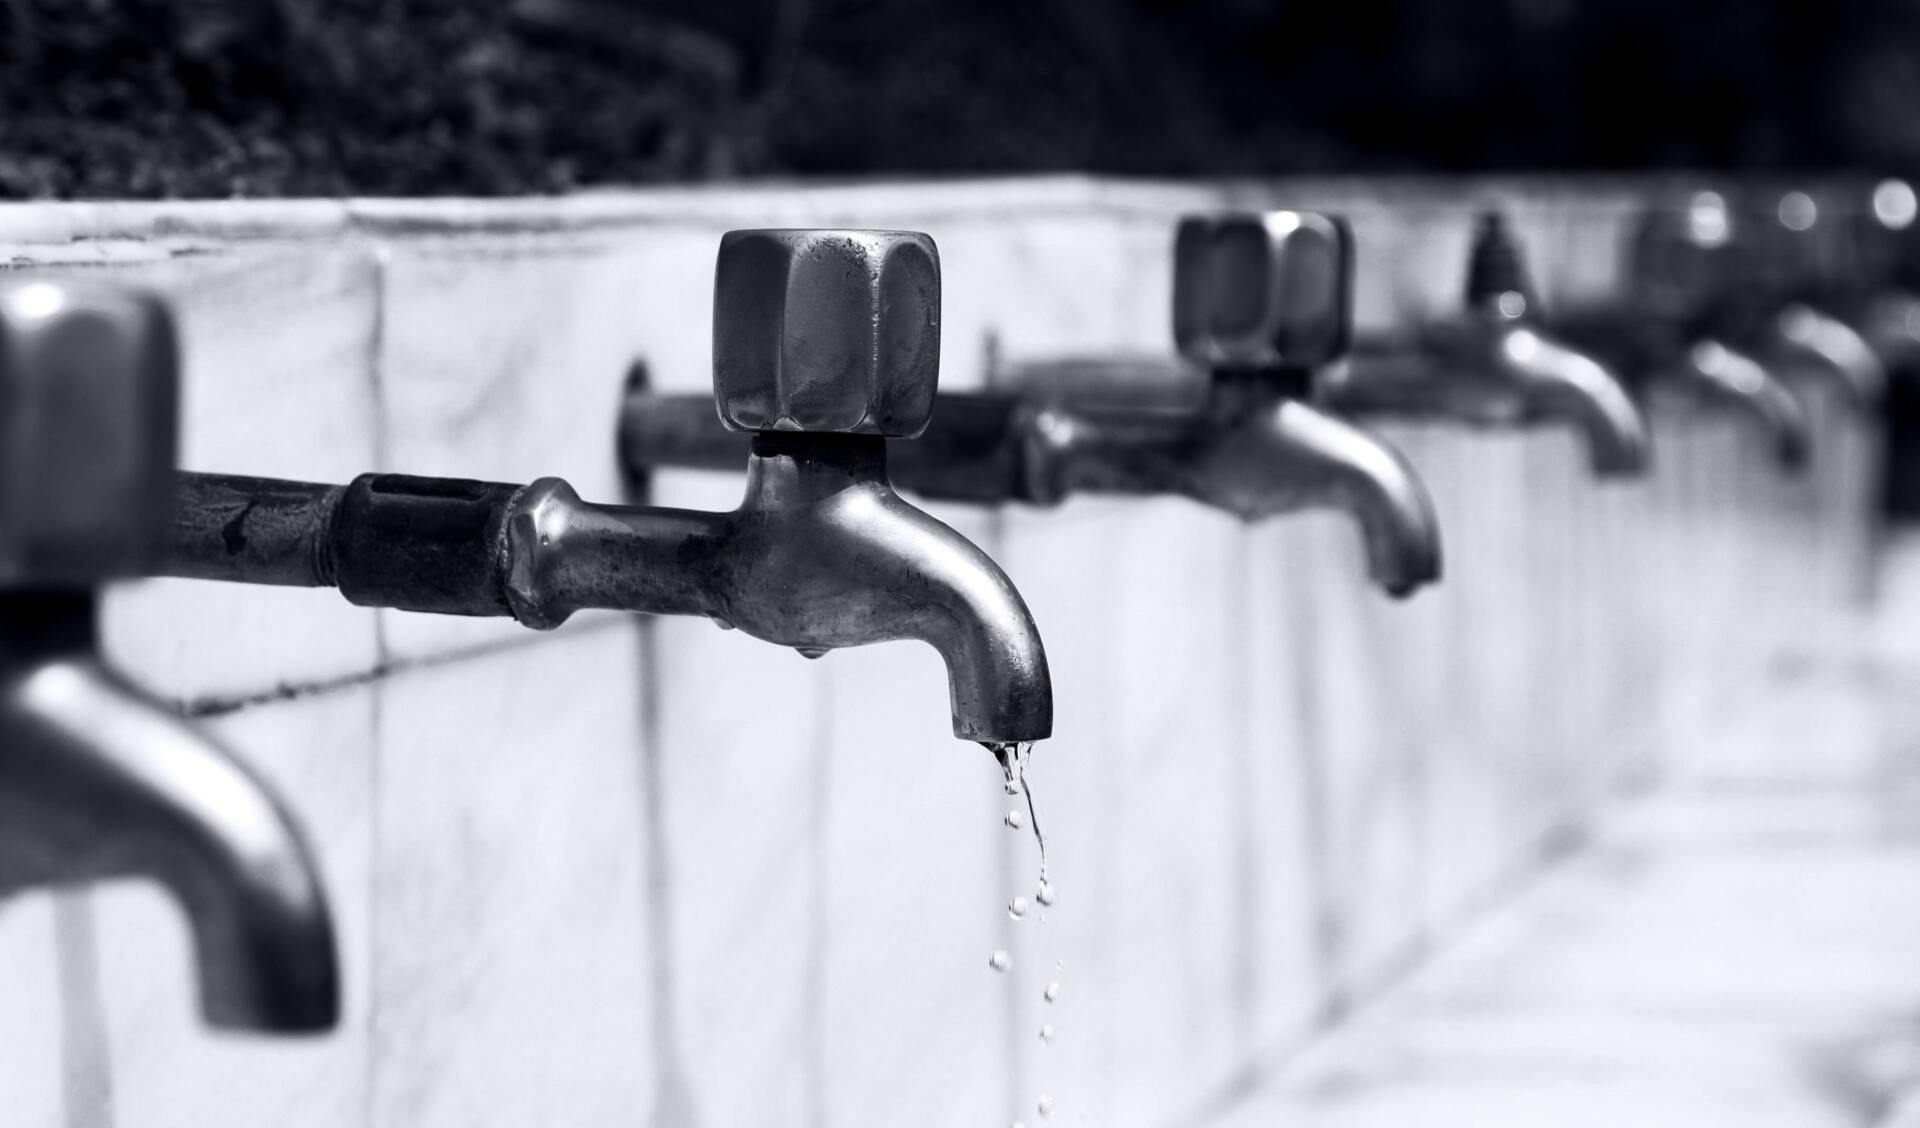 A sequence of faucets